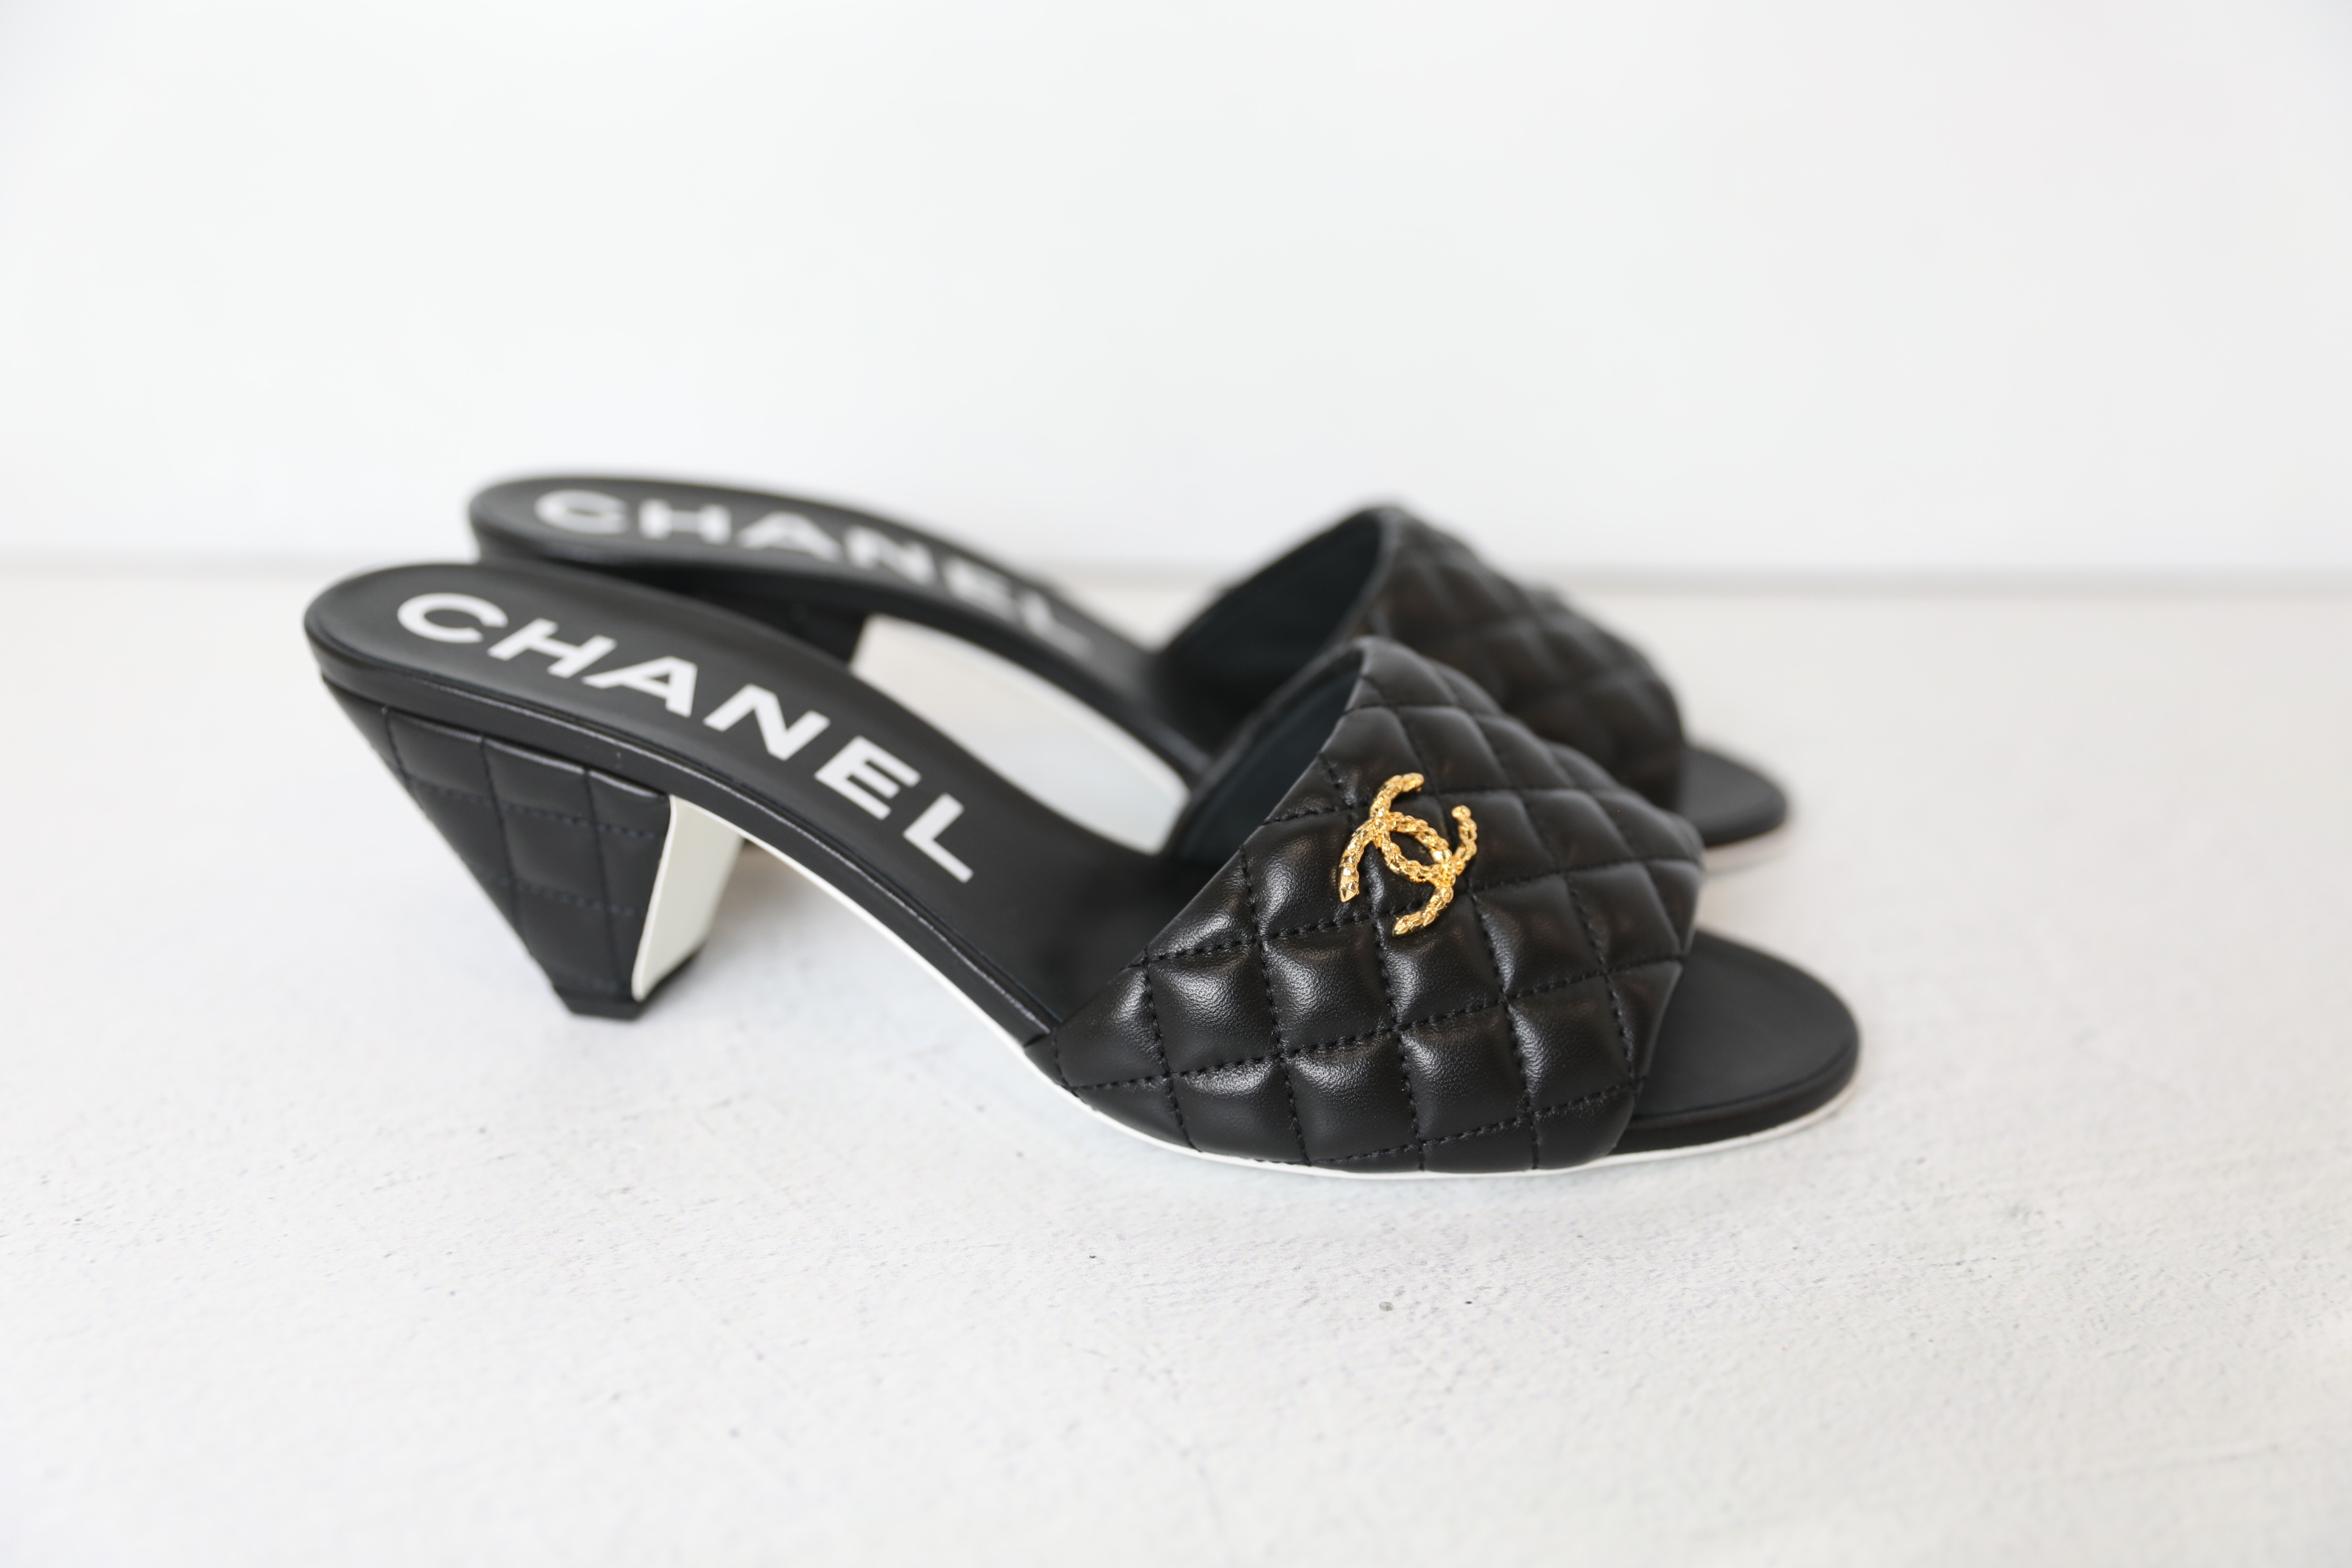 CHANEL, Shoes, Nib Chanel Black Quilted Mules With Gold Chanel Lettering  Purchased This Season